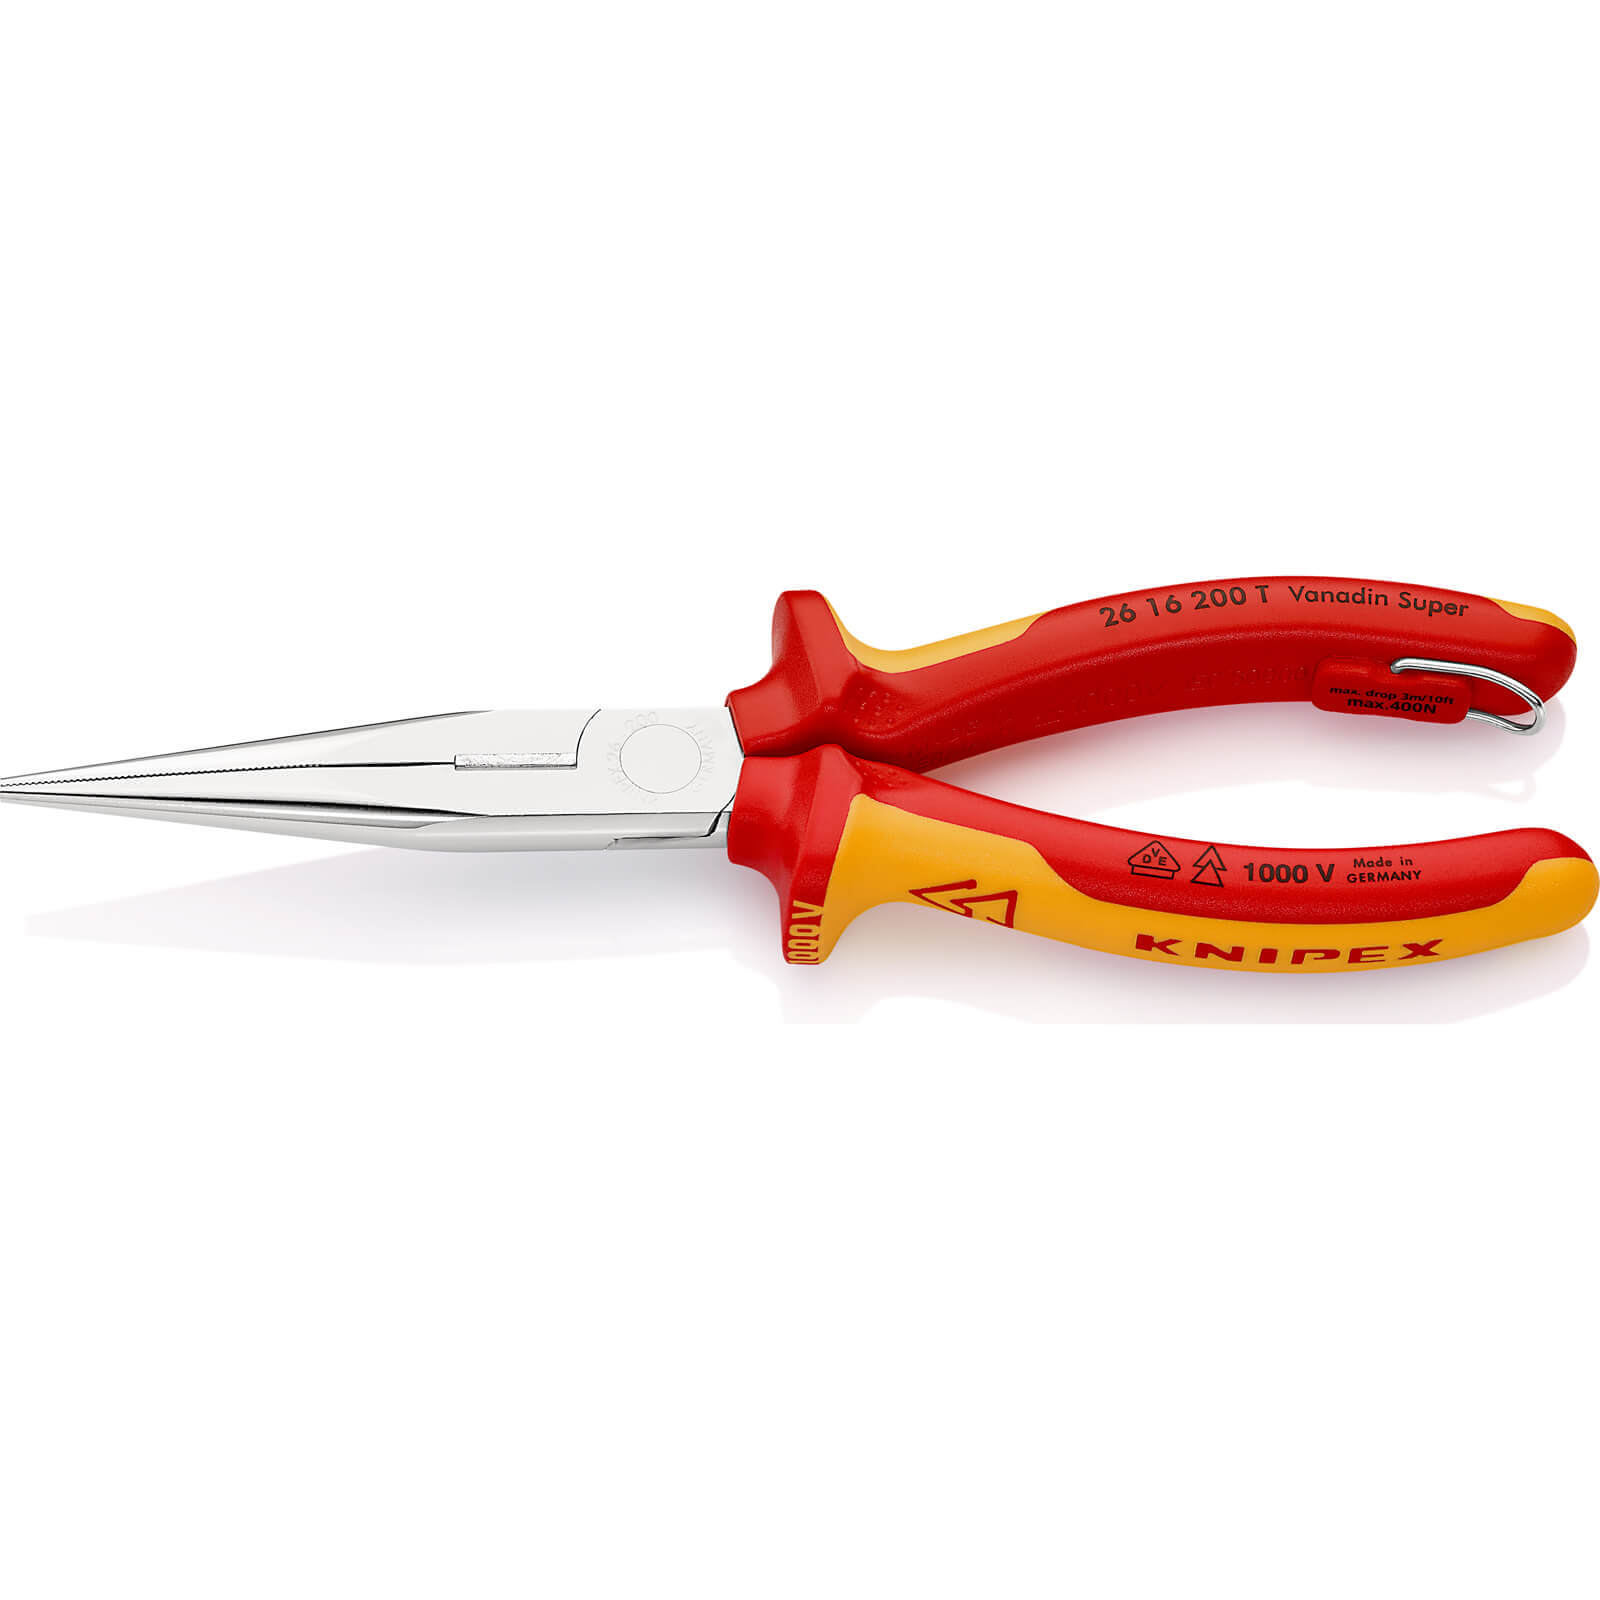 Knipex 26 16 VDE Insulated Long Nose Tethered Side Cutting Pliers 200mm